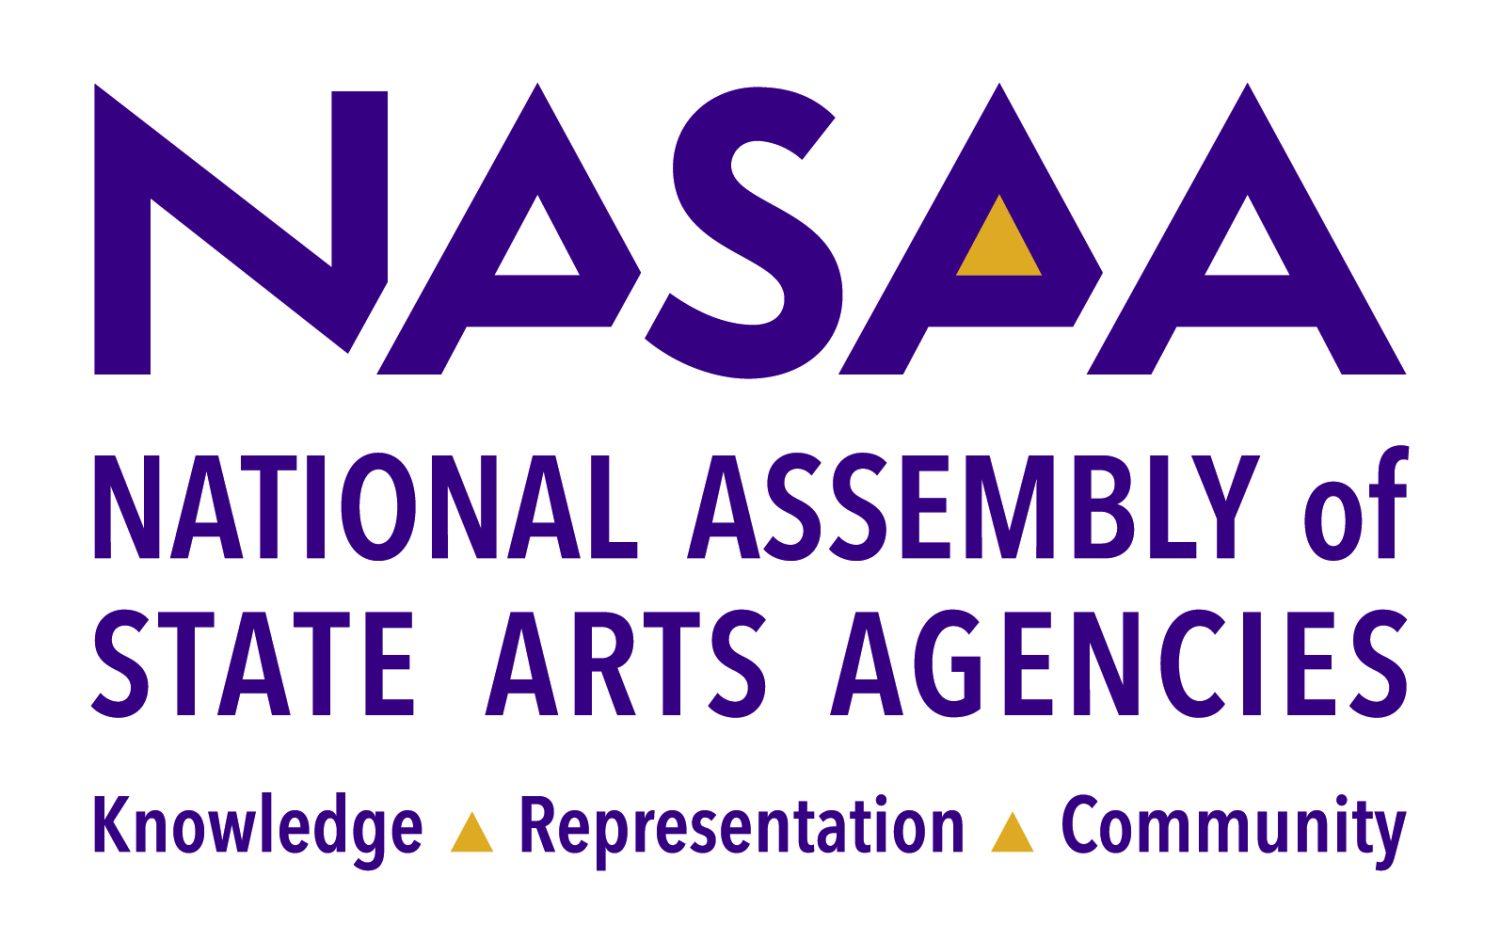 NASAA organization name spelled out in purple text with yellow gold accents with the words "knowledge, representation, community" listed at the bottom of the logo with small yellow gold triangles between the words